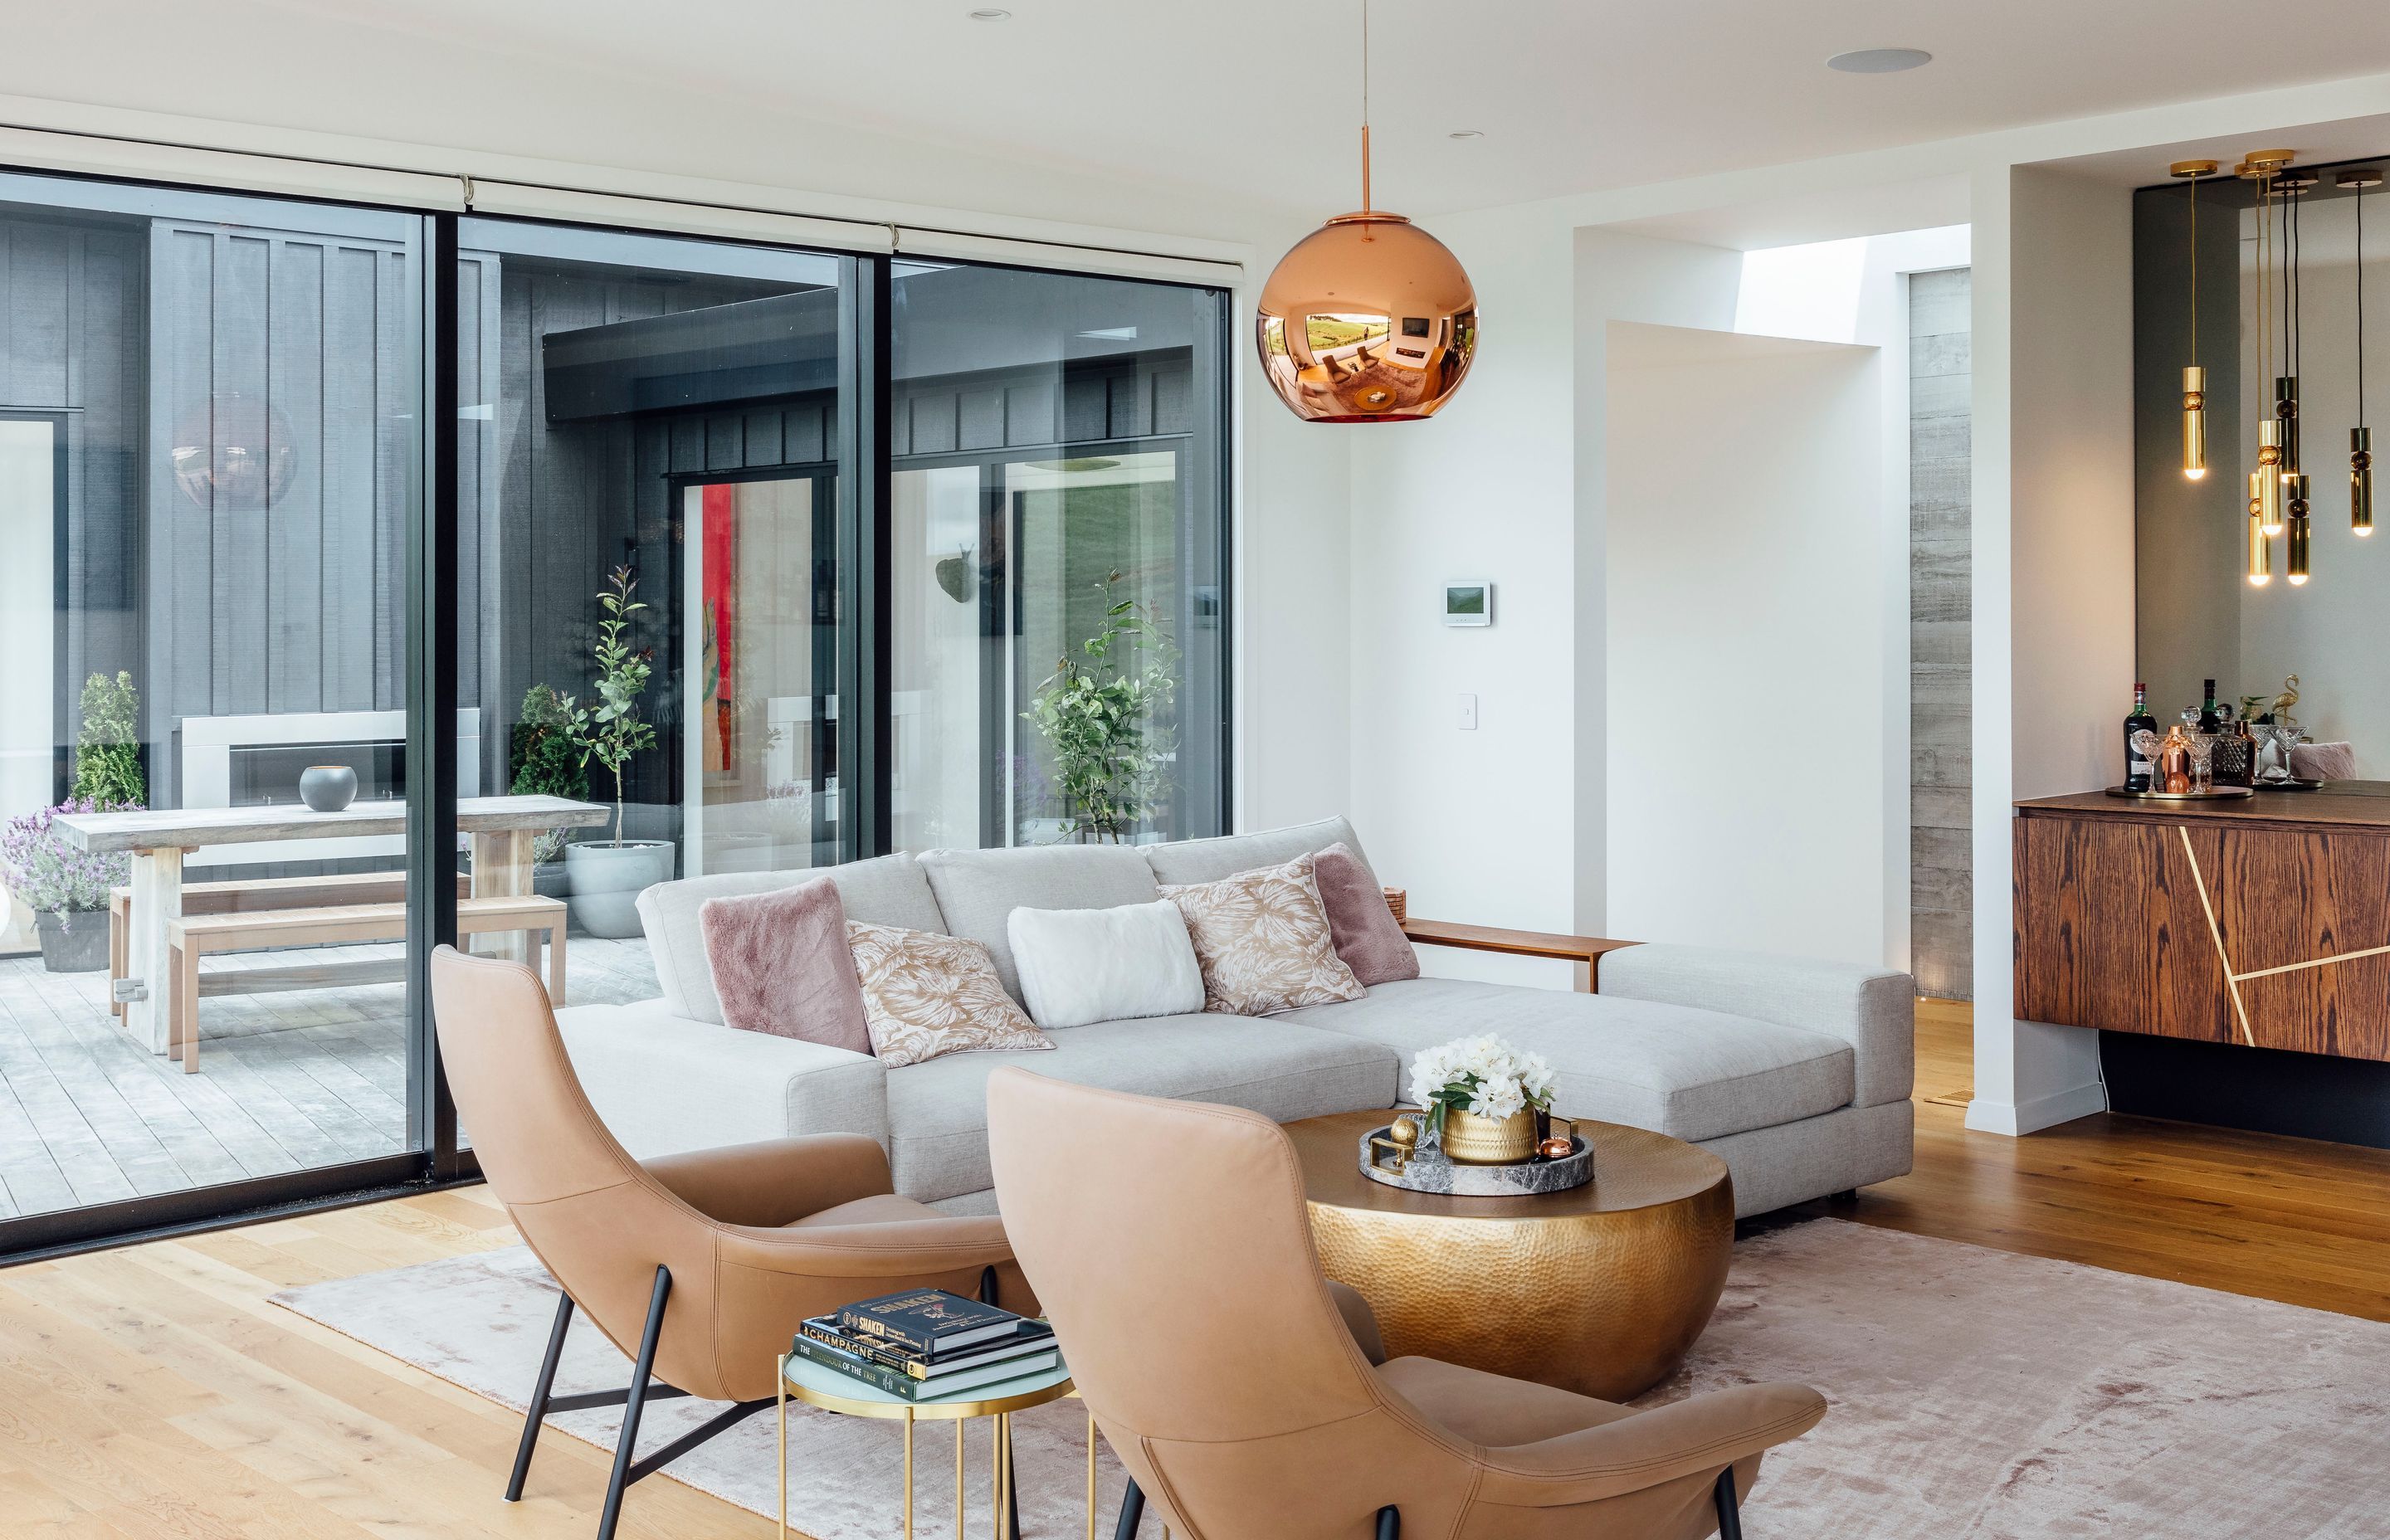 In the living area, Quick-Step compact flooring in 'Natural Oak' has an extra-matt finish. A Valentina rug in 'Blush' from Coco Republic was chosen to define the lounge, where a beaten brass drum coffee table from Freedom teams with Seymour chairs and a J